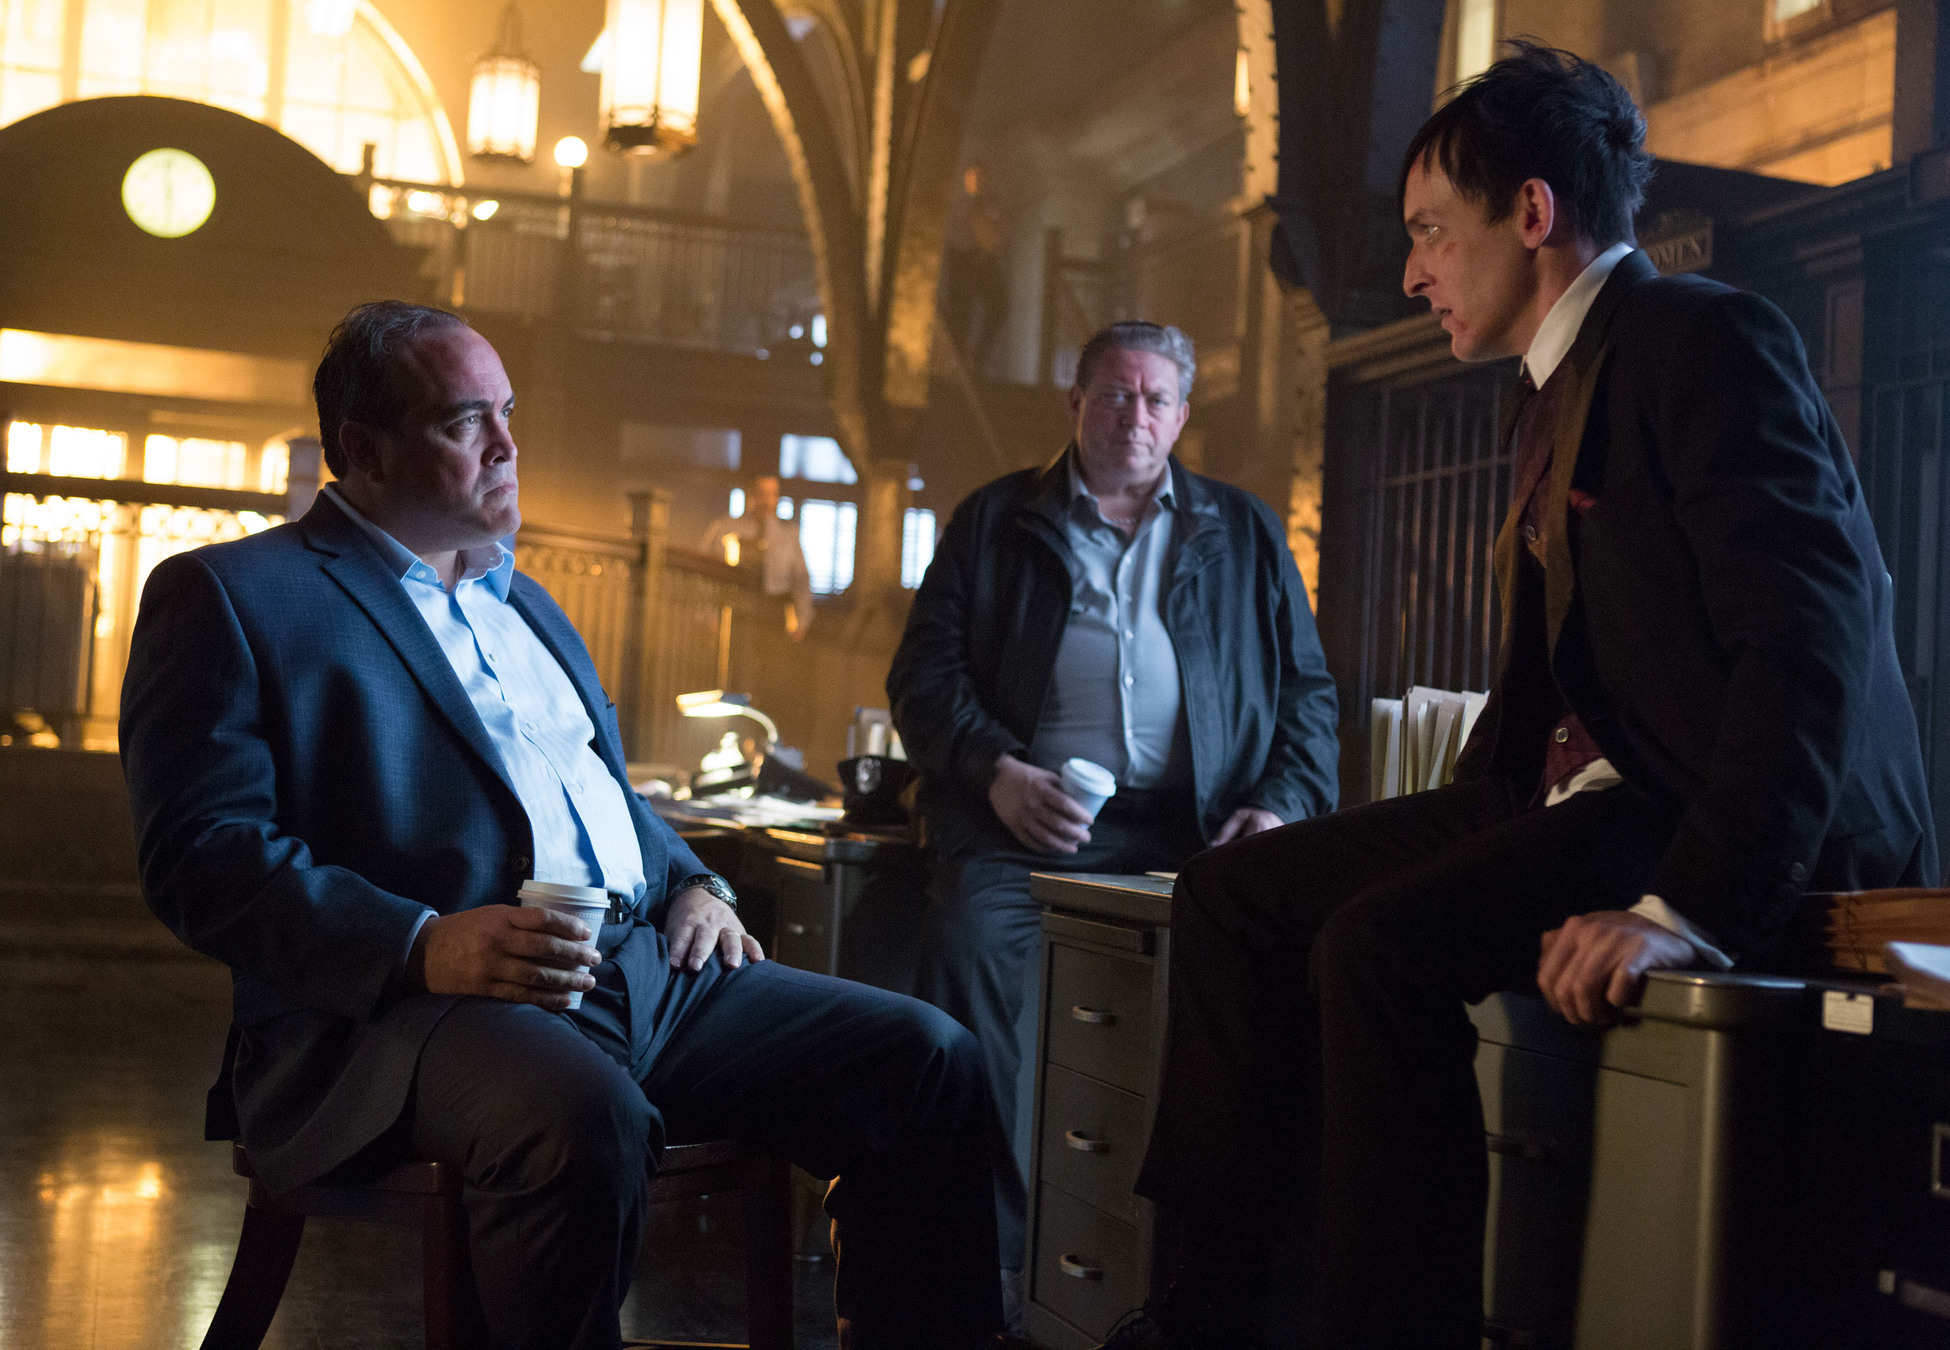 GOTHAM: Sal Maroni (guest star David Zayas, L) questions Oswald Cobblepot (Robin Lord Taylor, R) about his suspicious behavior in the "What The Little Bird Told Him" episode of GOTHAM airing Monday, Jan. 19 (8:00-9:00 PM ET/PT) on FOX. Â©2014 Fox Broadcasting Co. Cr: Jessica Miglio/FOX